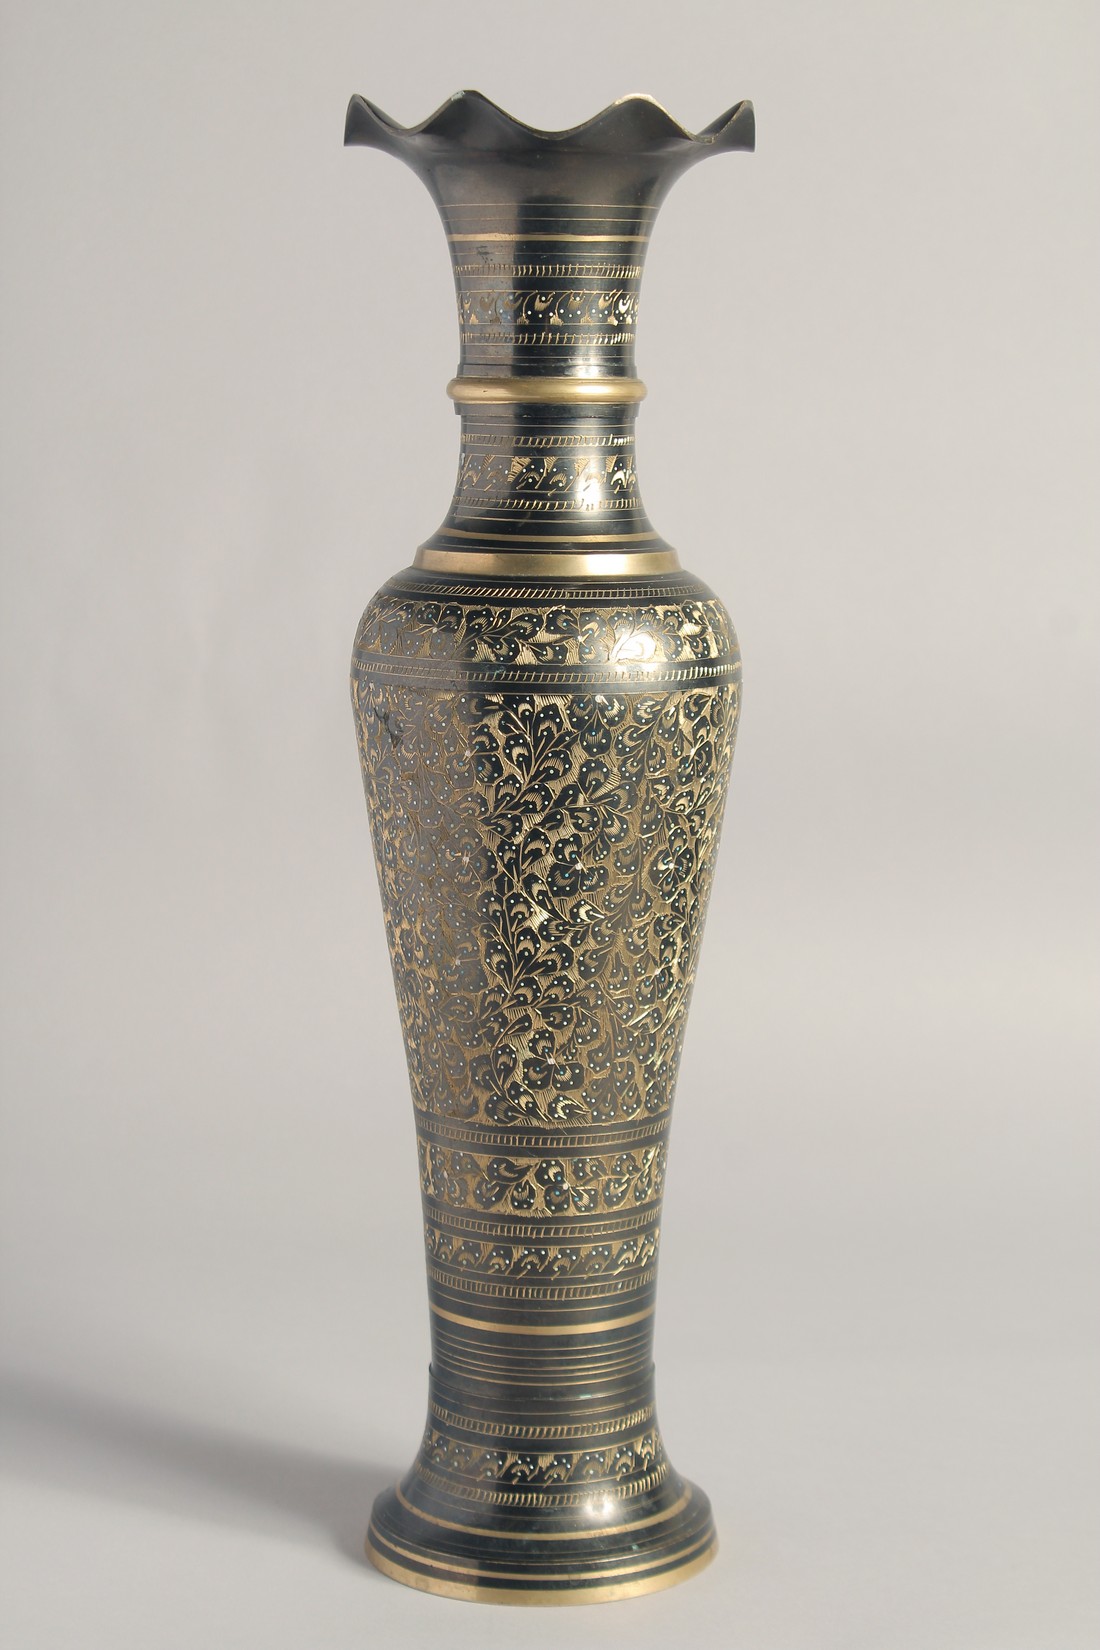 A FINE INDIAN METAL VASE, with engraved decoration, 40.5cm high. - Image 3 of 8